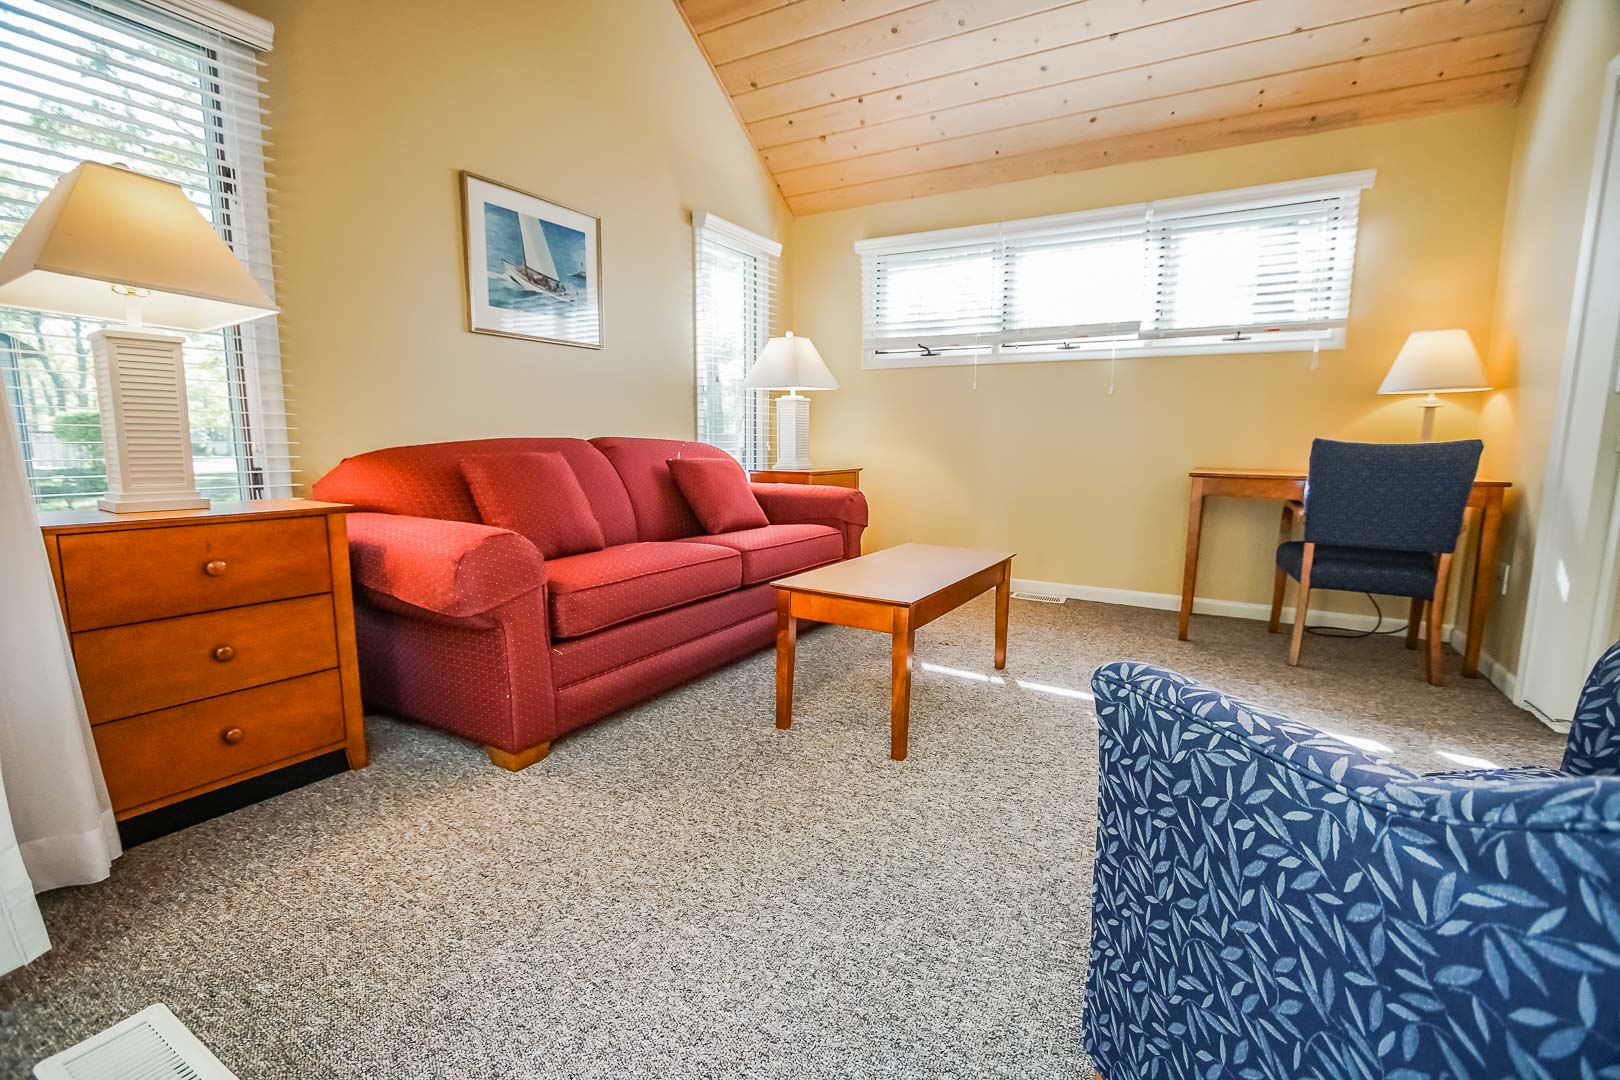 A peaceful living room area at VRI's Cape Cod Holiday Estates in Massachusetts.